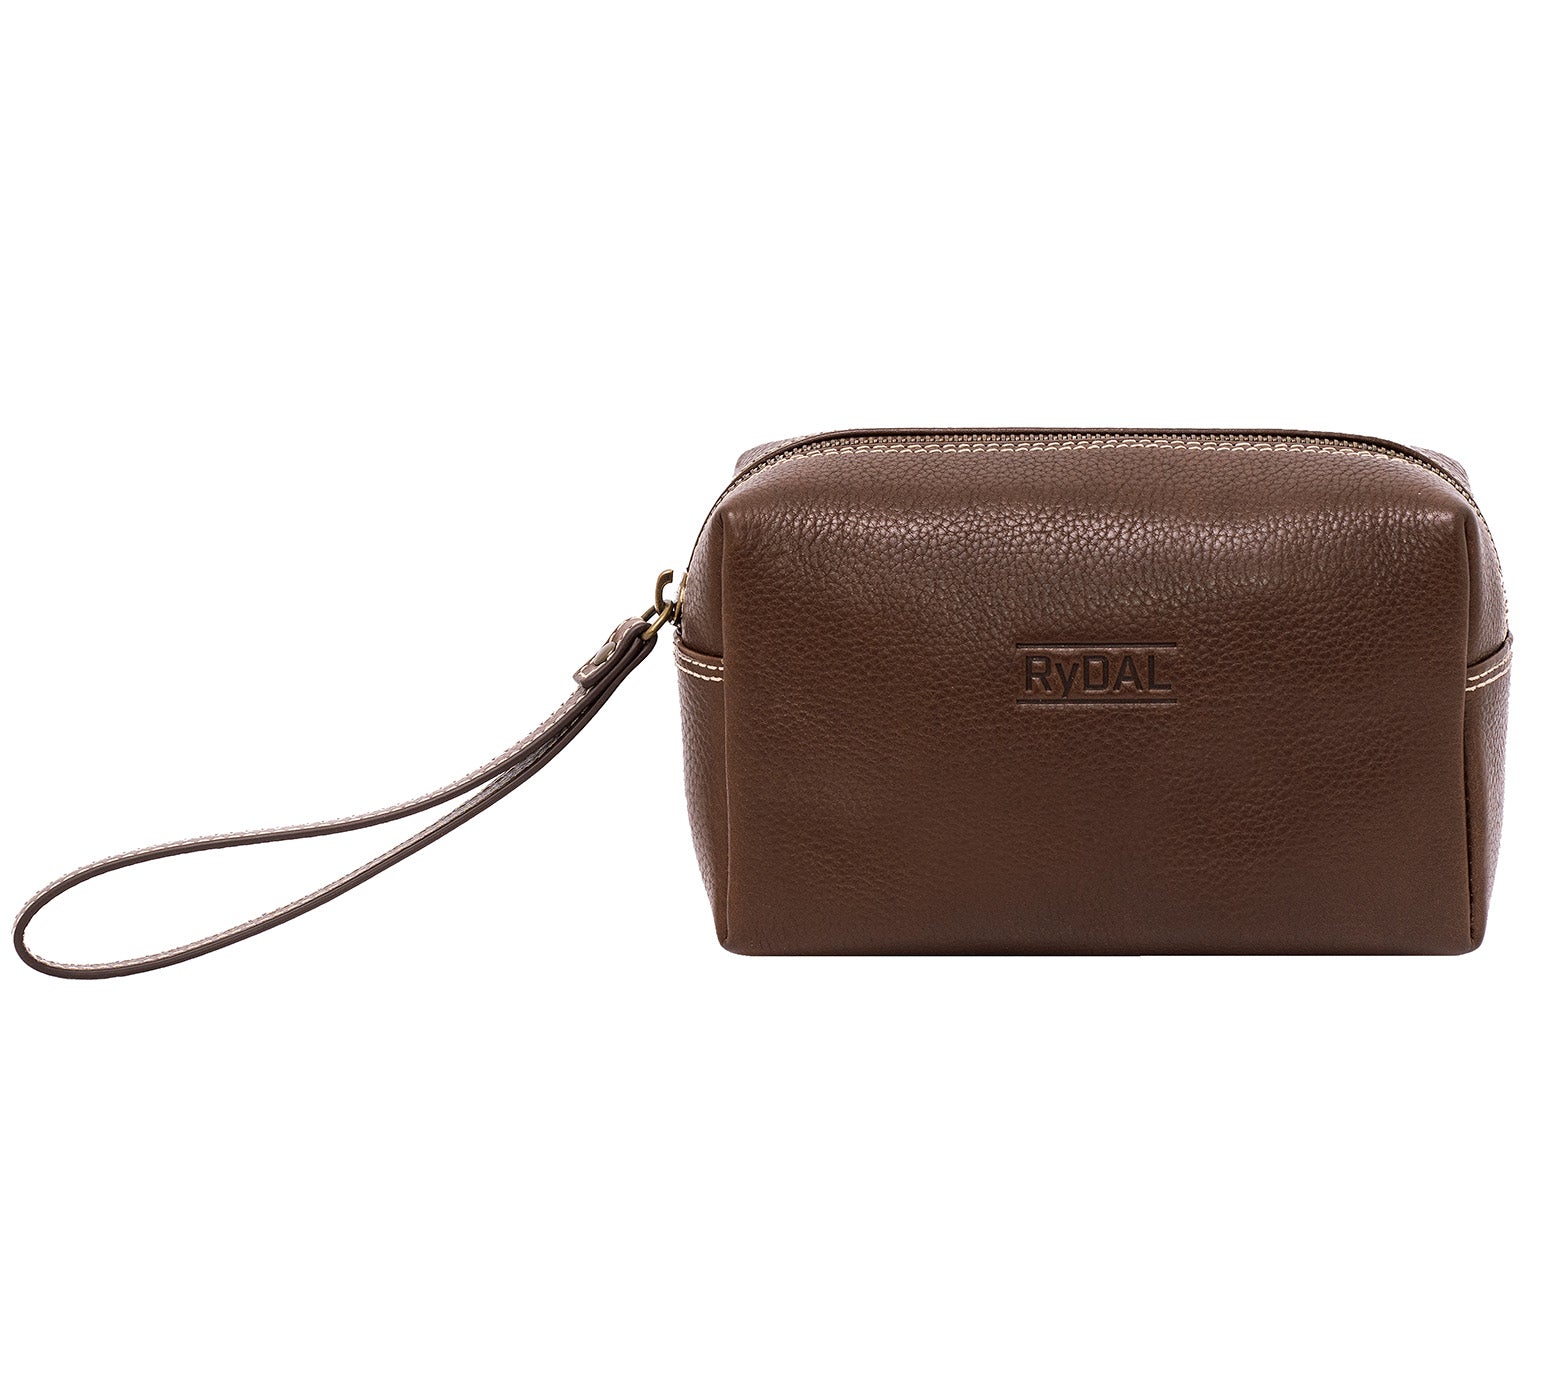 Leather Wrist Bag from Rydal in 'Dark Brown' showing front. 